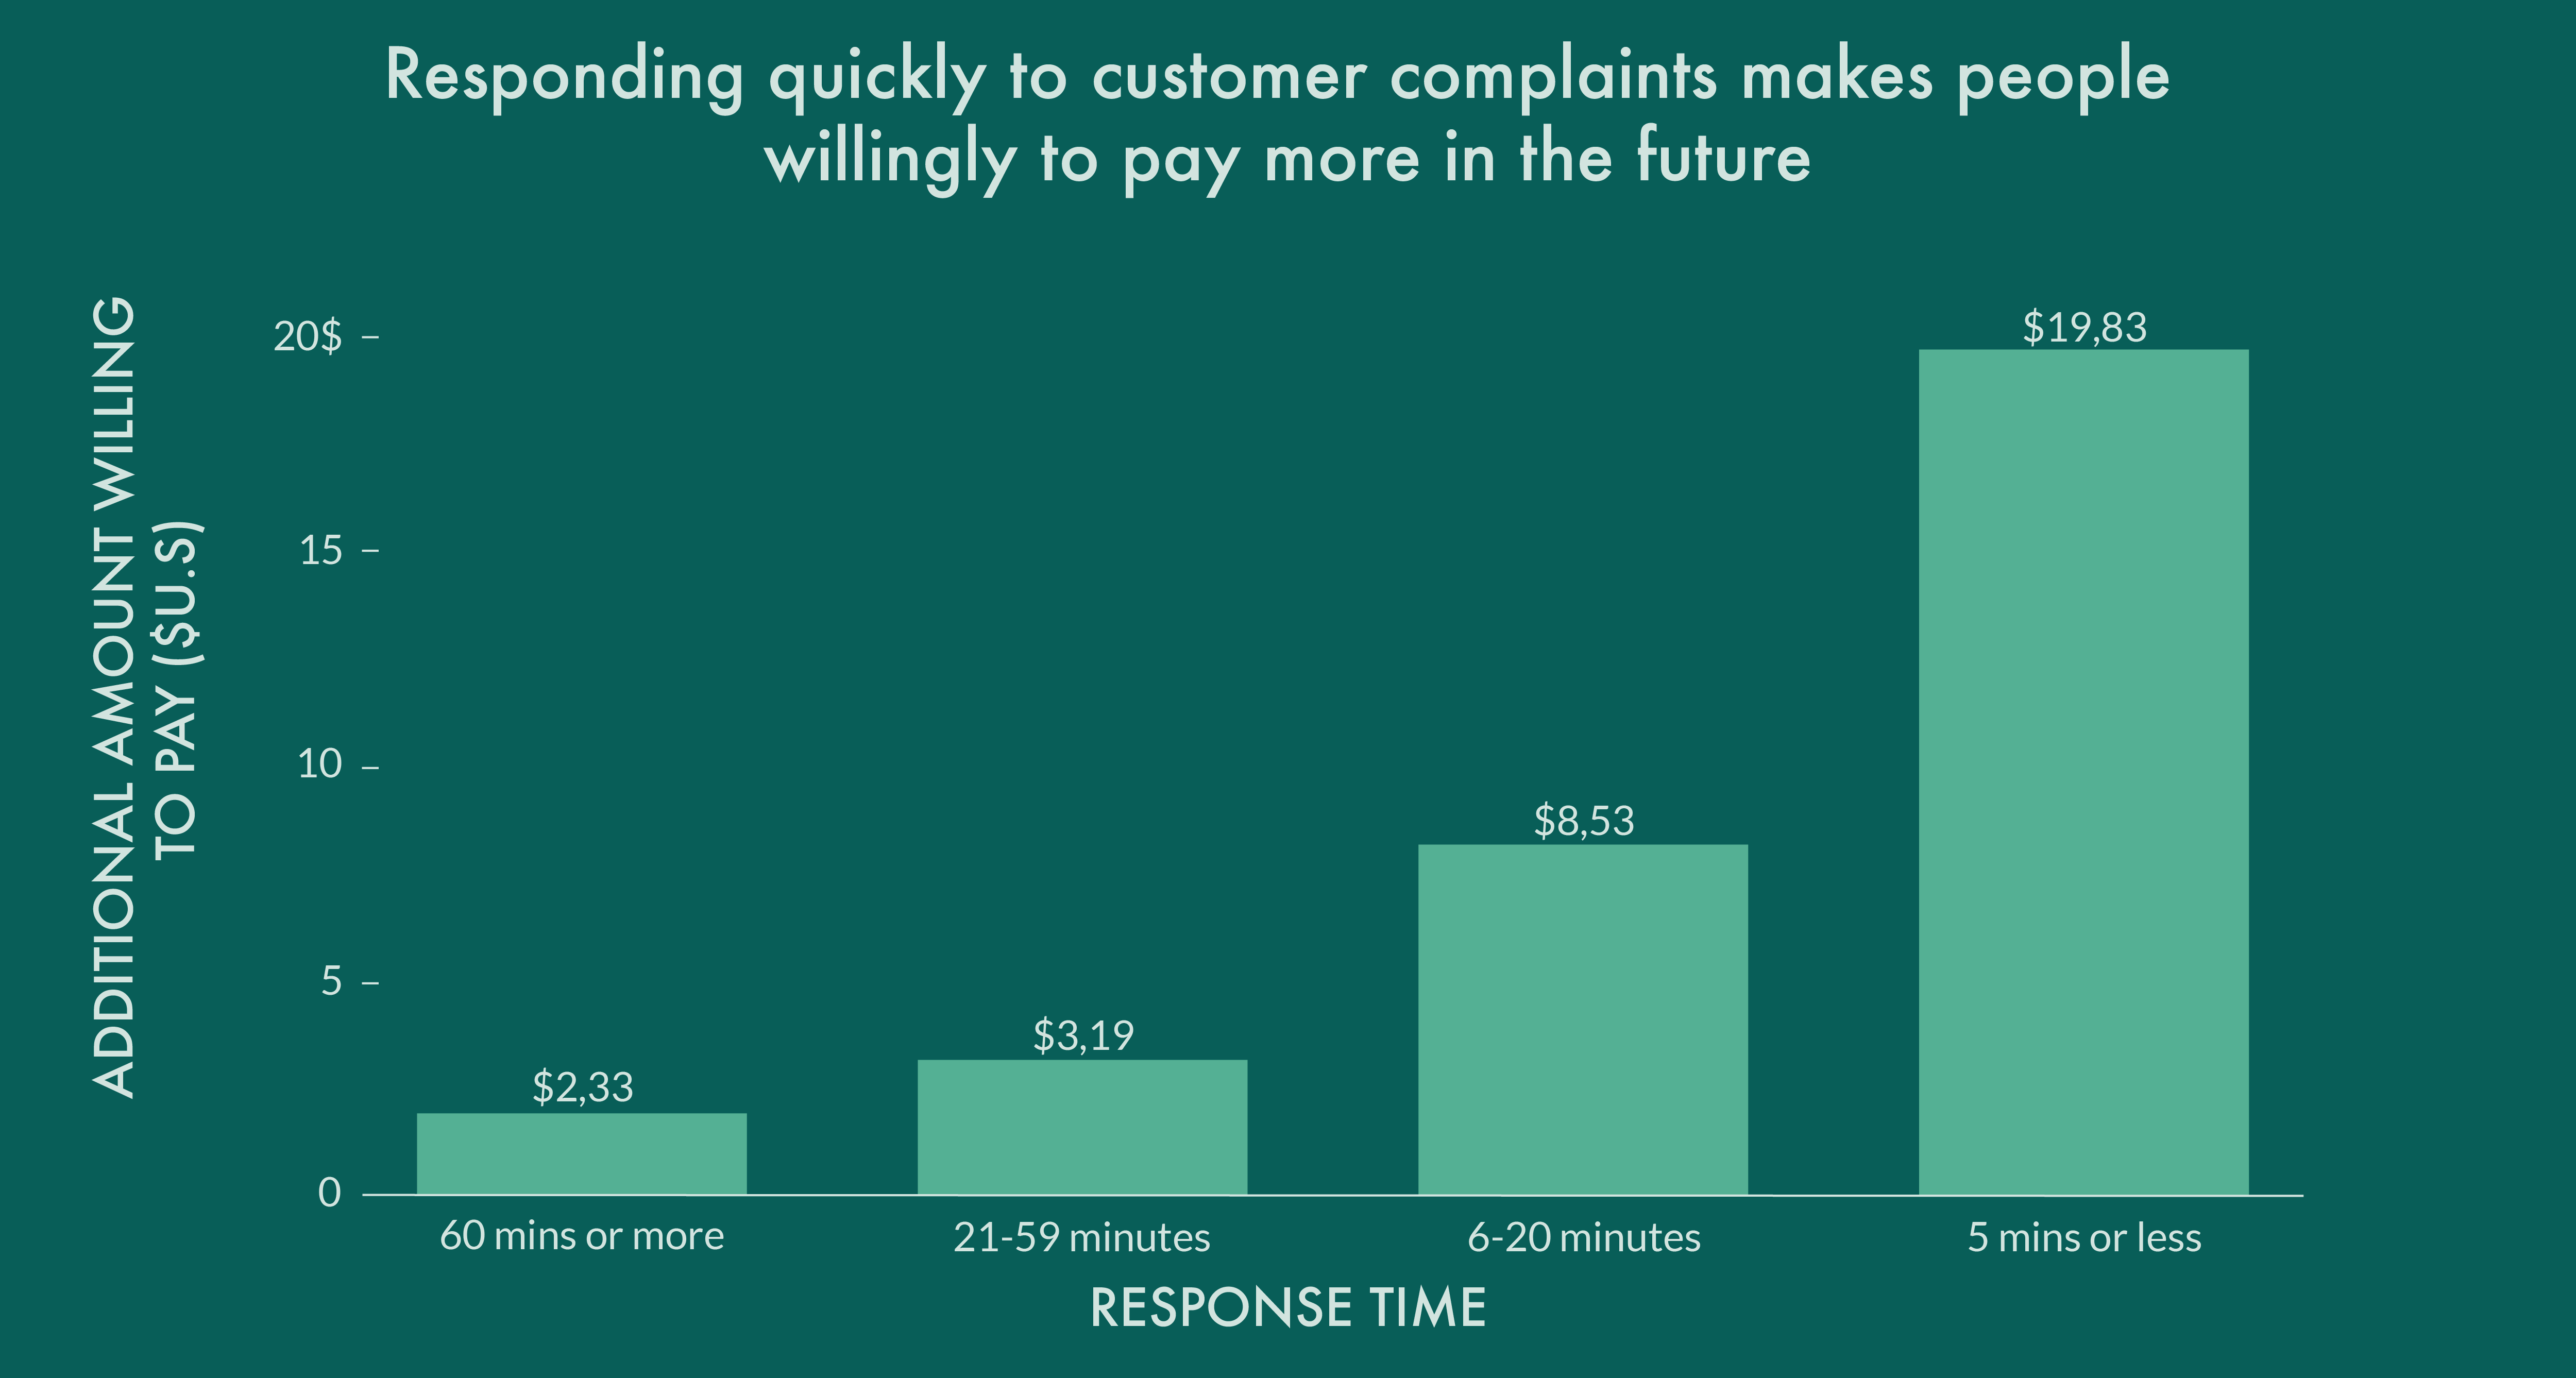 Business-to-business customers expect personal service in online chat